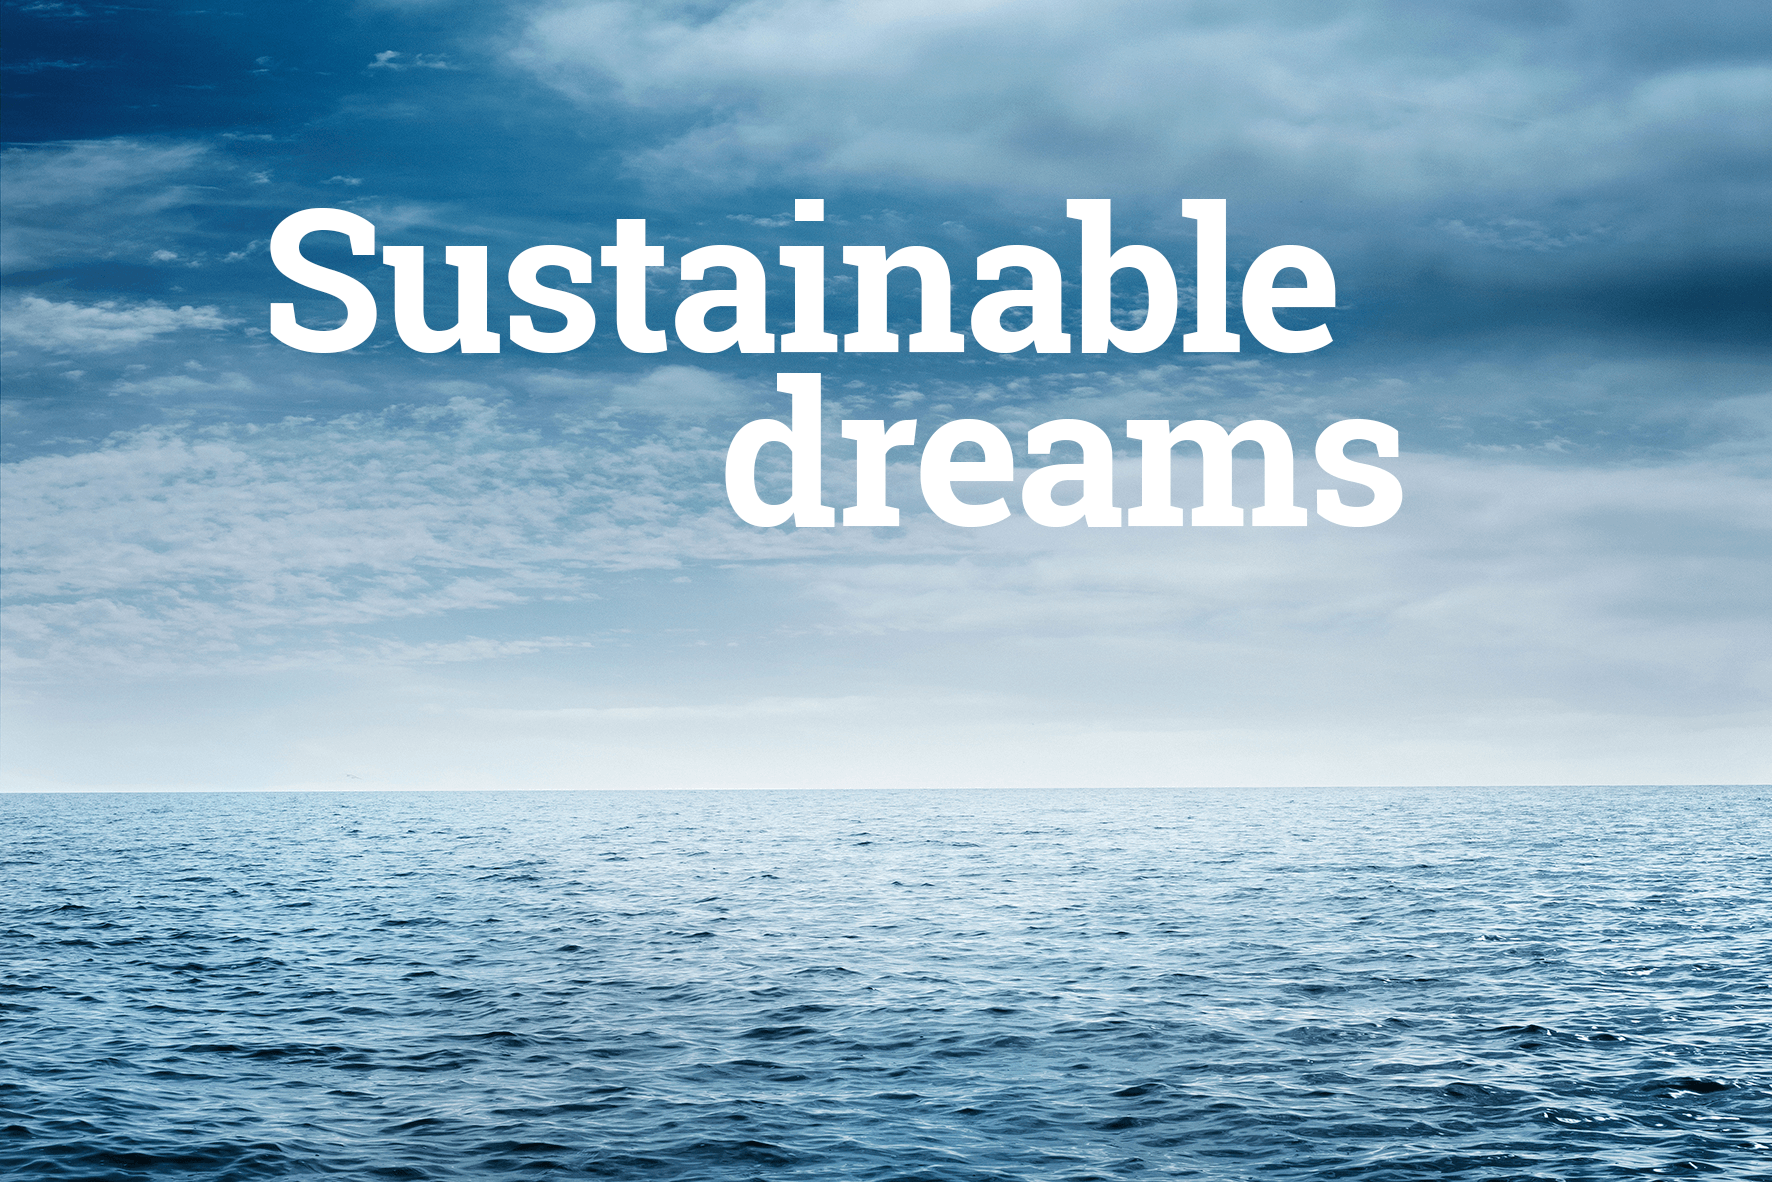 Sustainable dreams